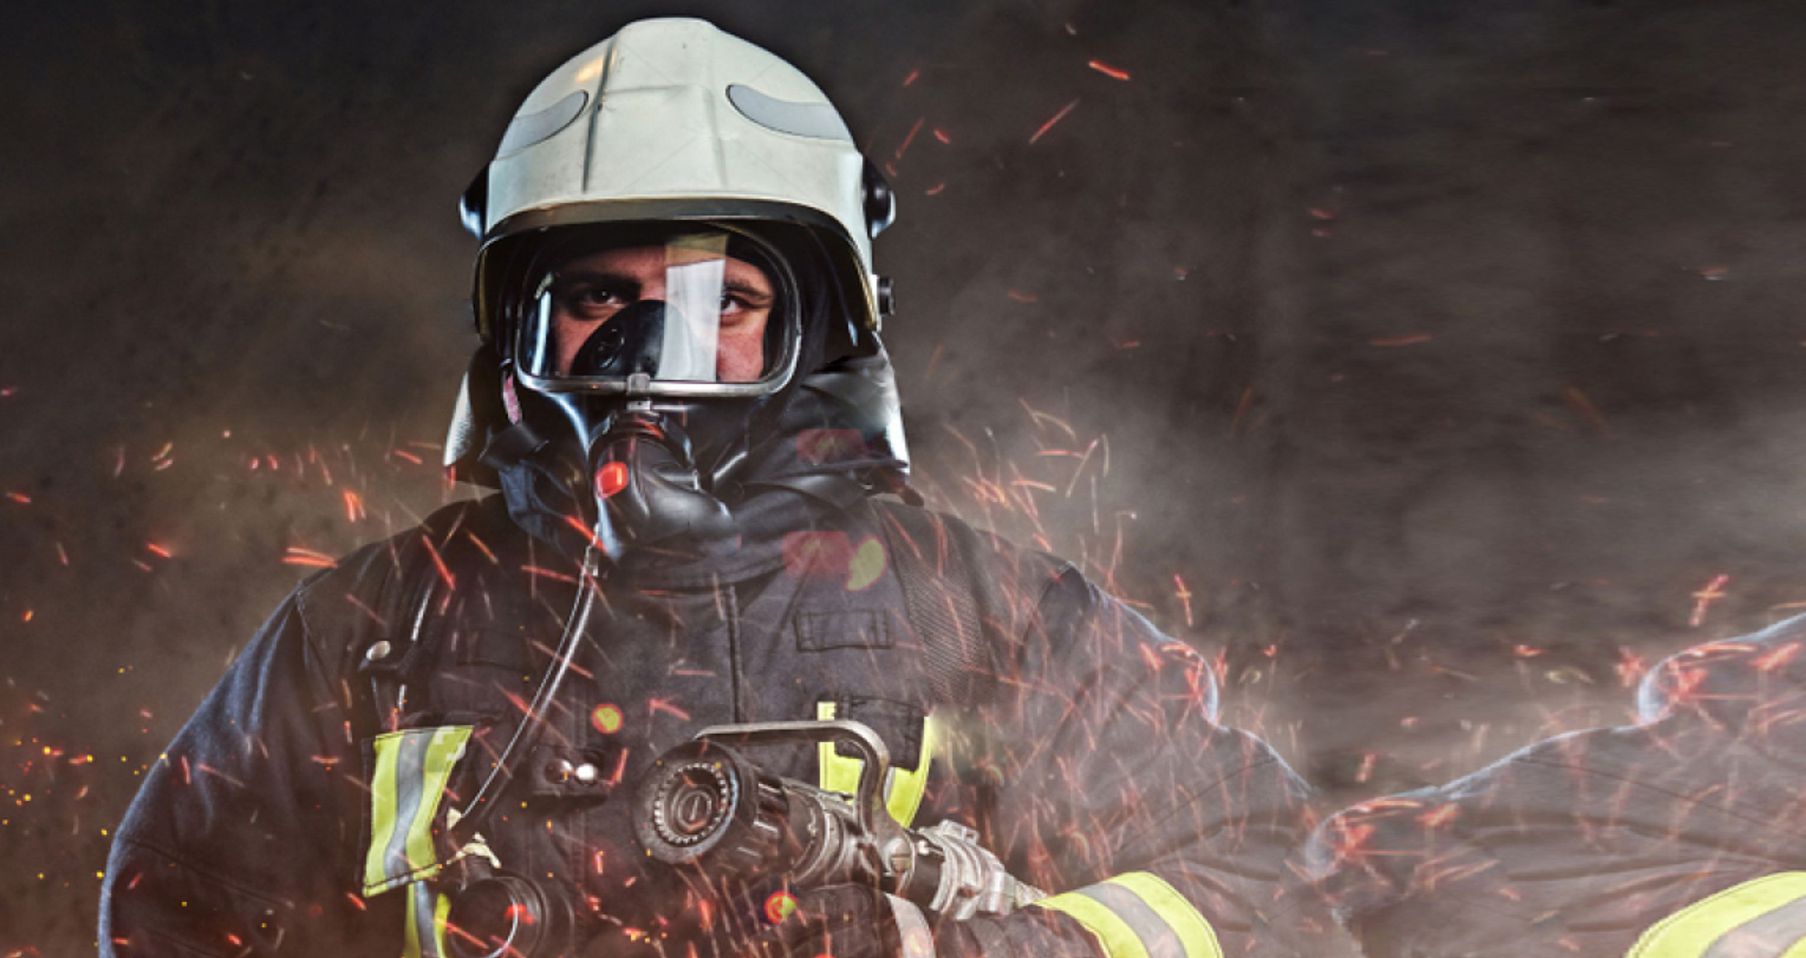 What types of industries benefit most from Master Fire Prevention Systems?